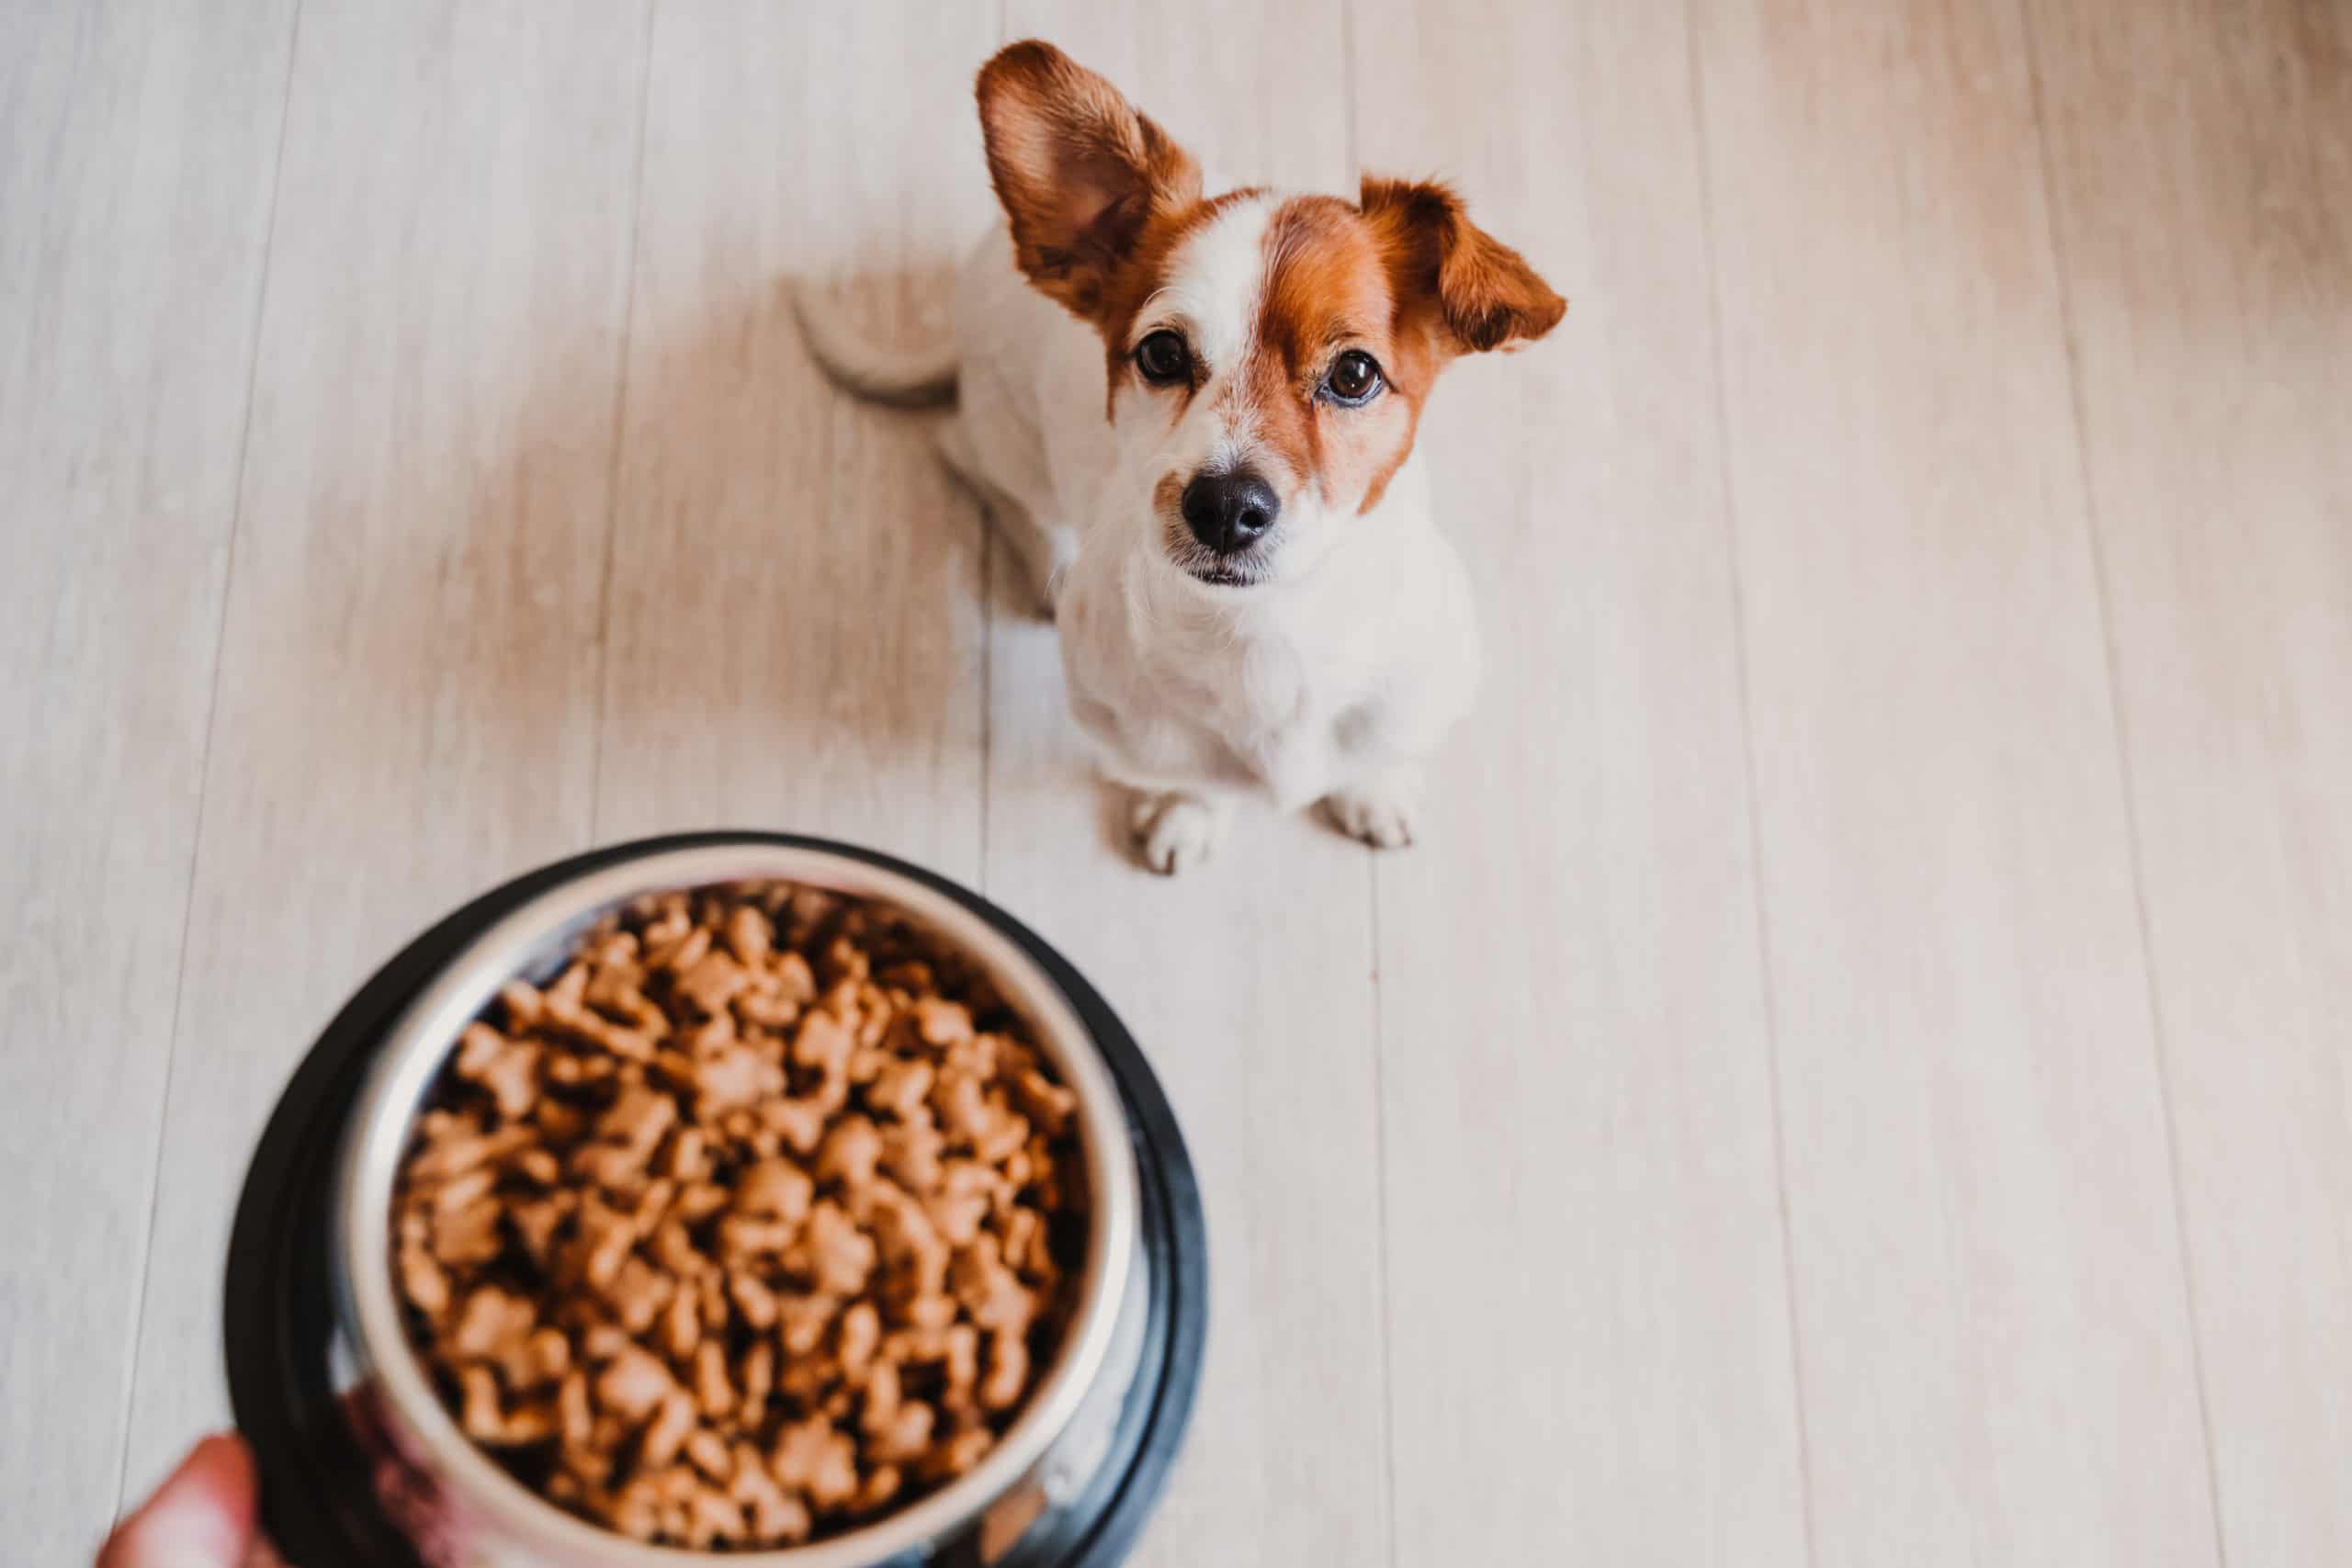 Why do dogs love food so much?